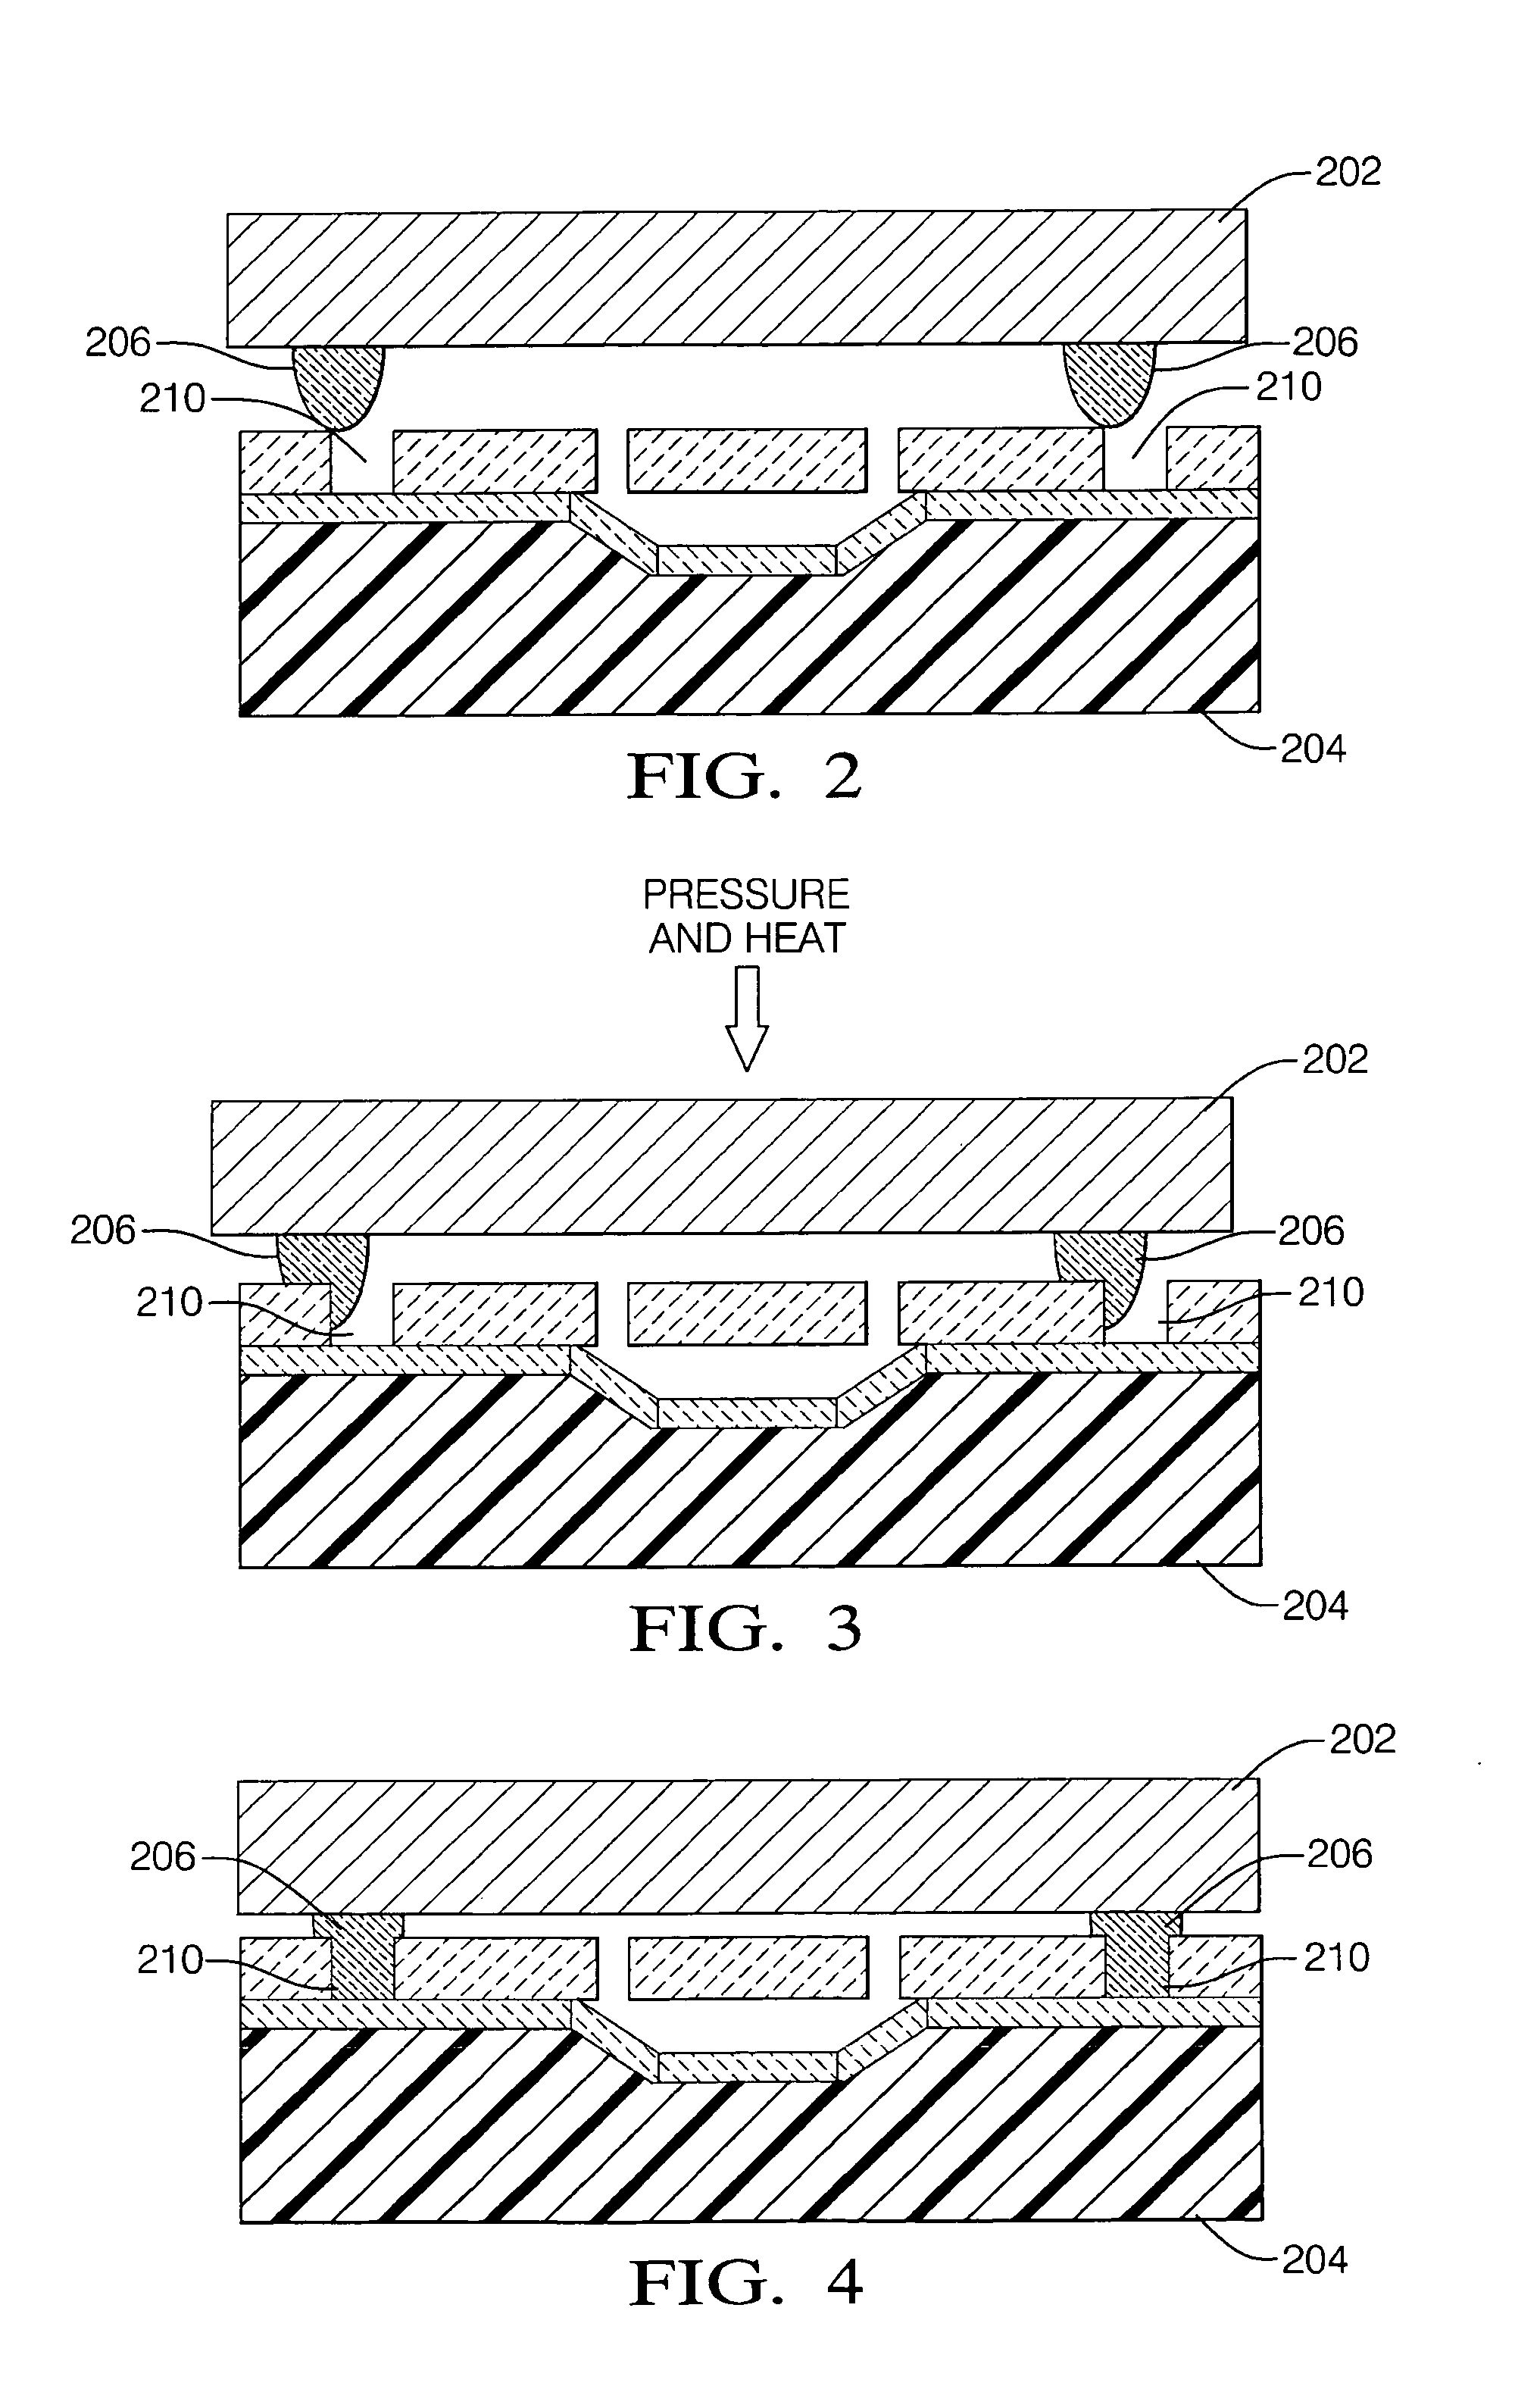 Alignment of a cap to a MEMS wafer